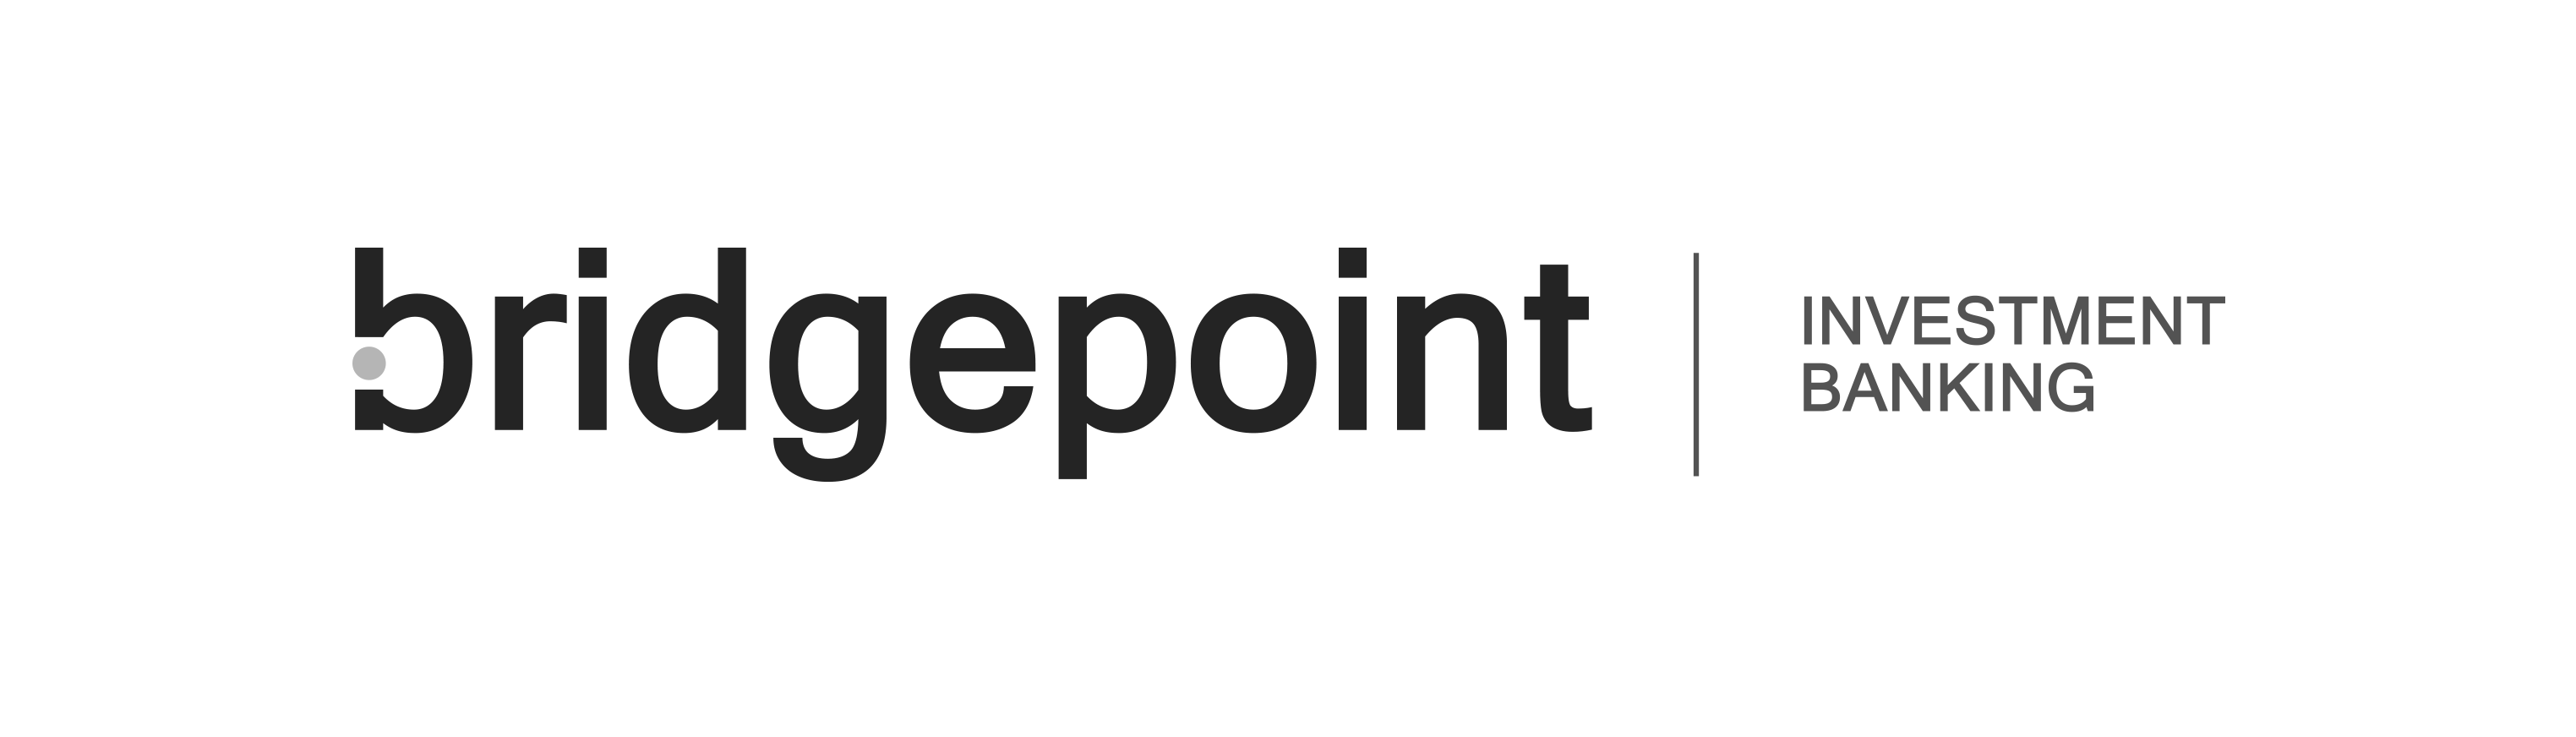 Investment Banking Logo - Bridgepoint Investment Banking